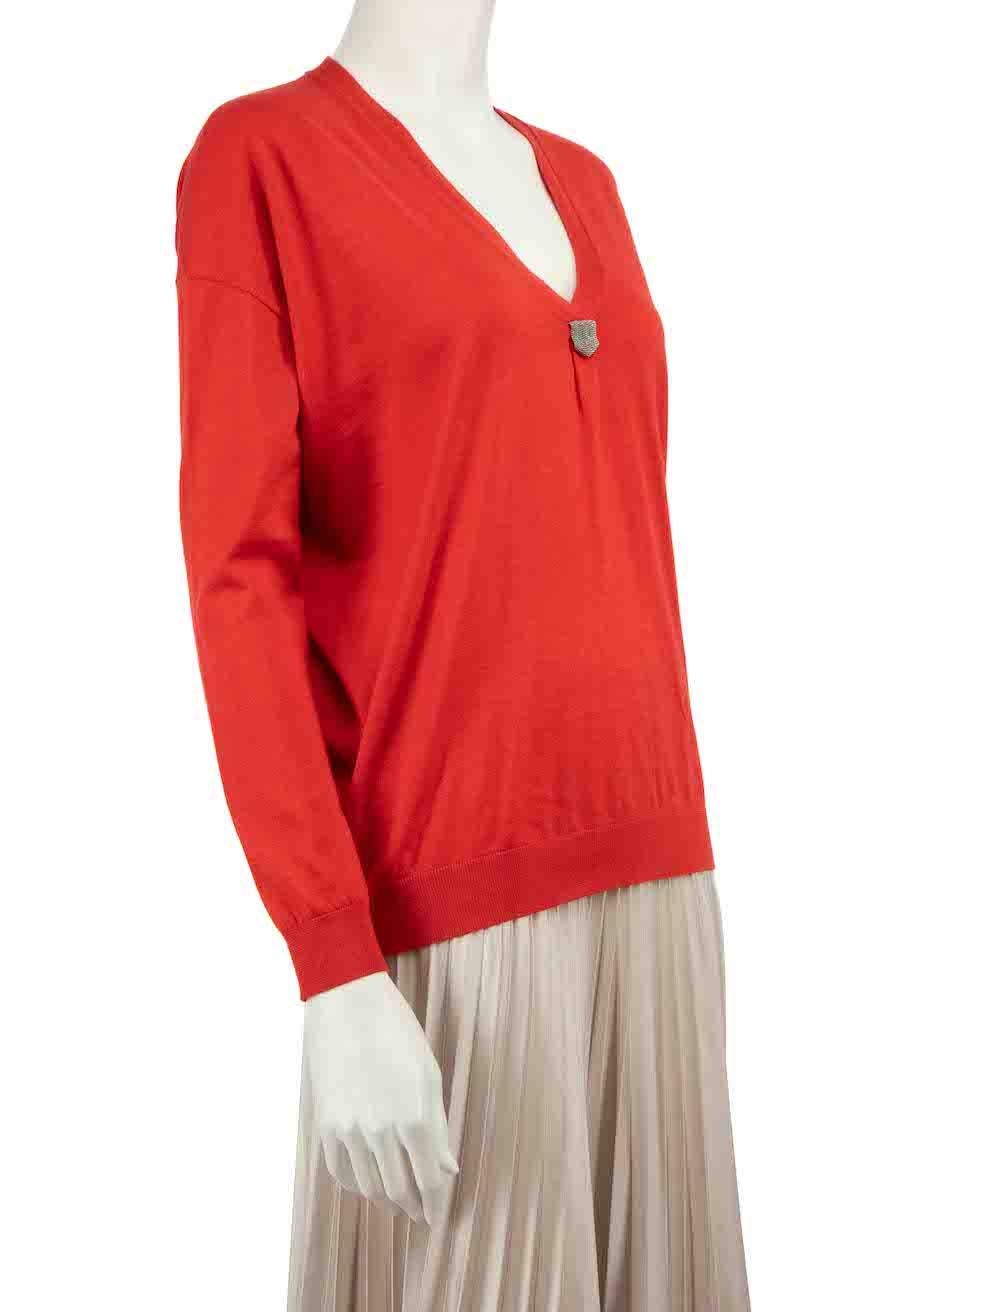 CONDITION is Very good. Hardly any visible wear to cardigan is evident on this used Brunello Cucinelli designer resale item.
 
 
 
 Details
 
 
 Red
 
 Cashmere
 
 Knit top
 
 V-neck
 
 Long sleeves
 
 Beaded embellishment
 
 
 
 
 
 Made in Italy
